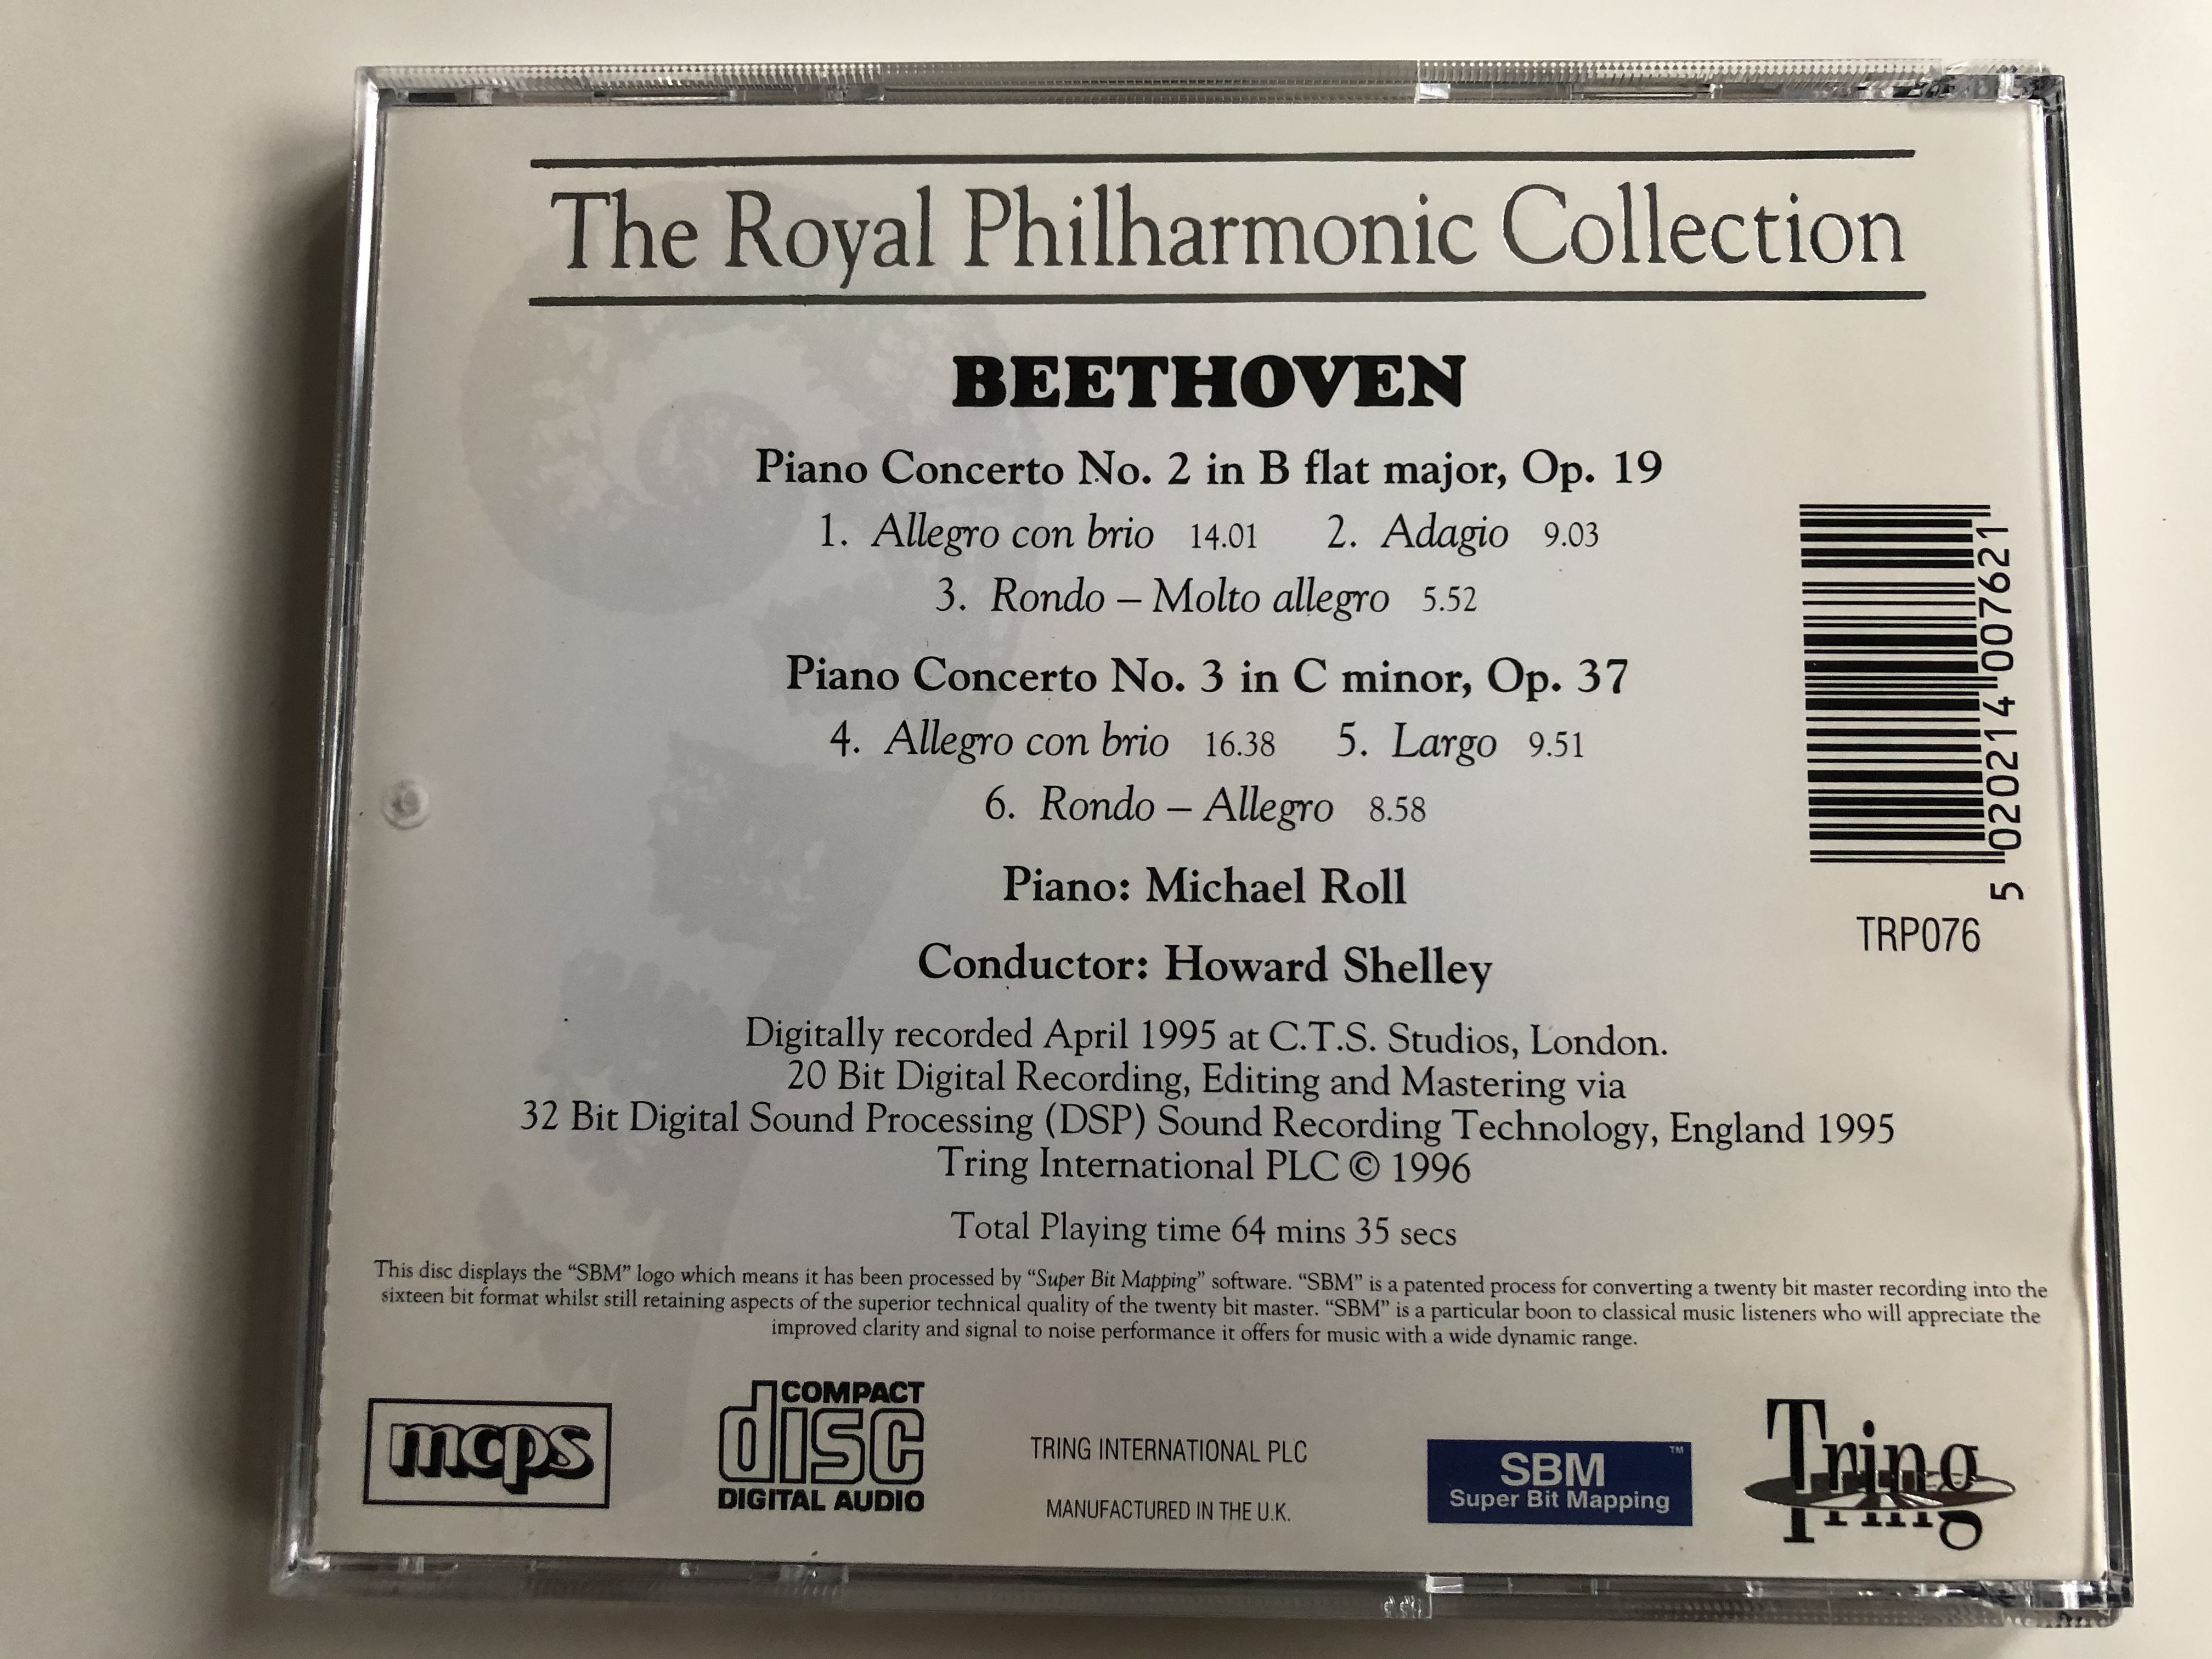 the-royal-philharmonic-collection-beethoven-piano-concertos-no.-2-in-b-flat-major-op.-19-no.-3-in-c-minor-op.-37-royal-philharmonic-orchestra-piano-michael-roll-conductor-howard-shelley-7-.jpg